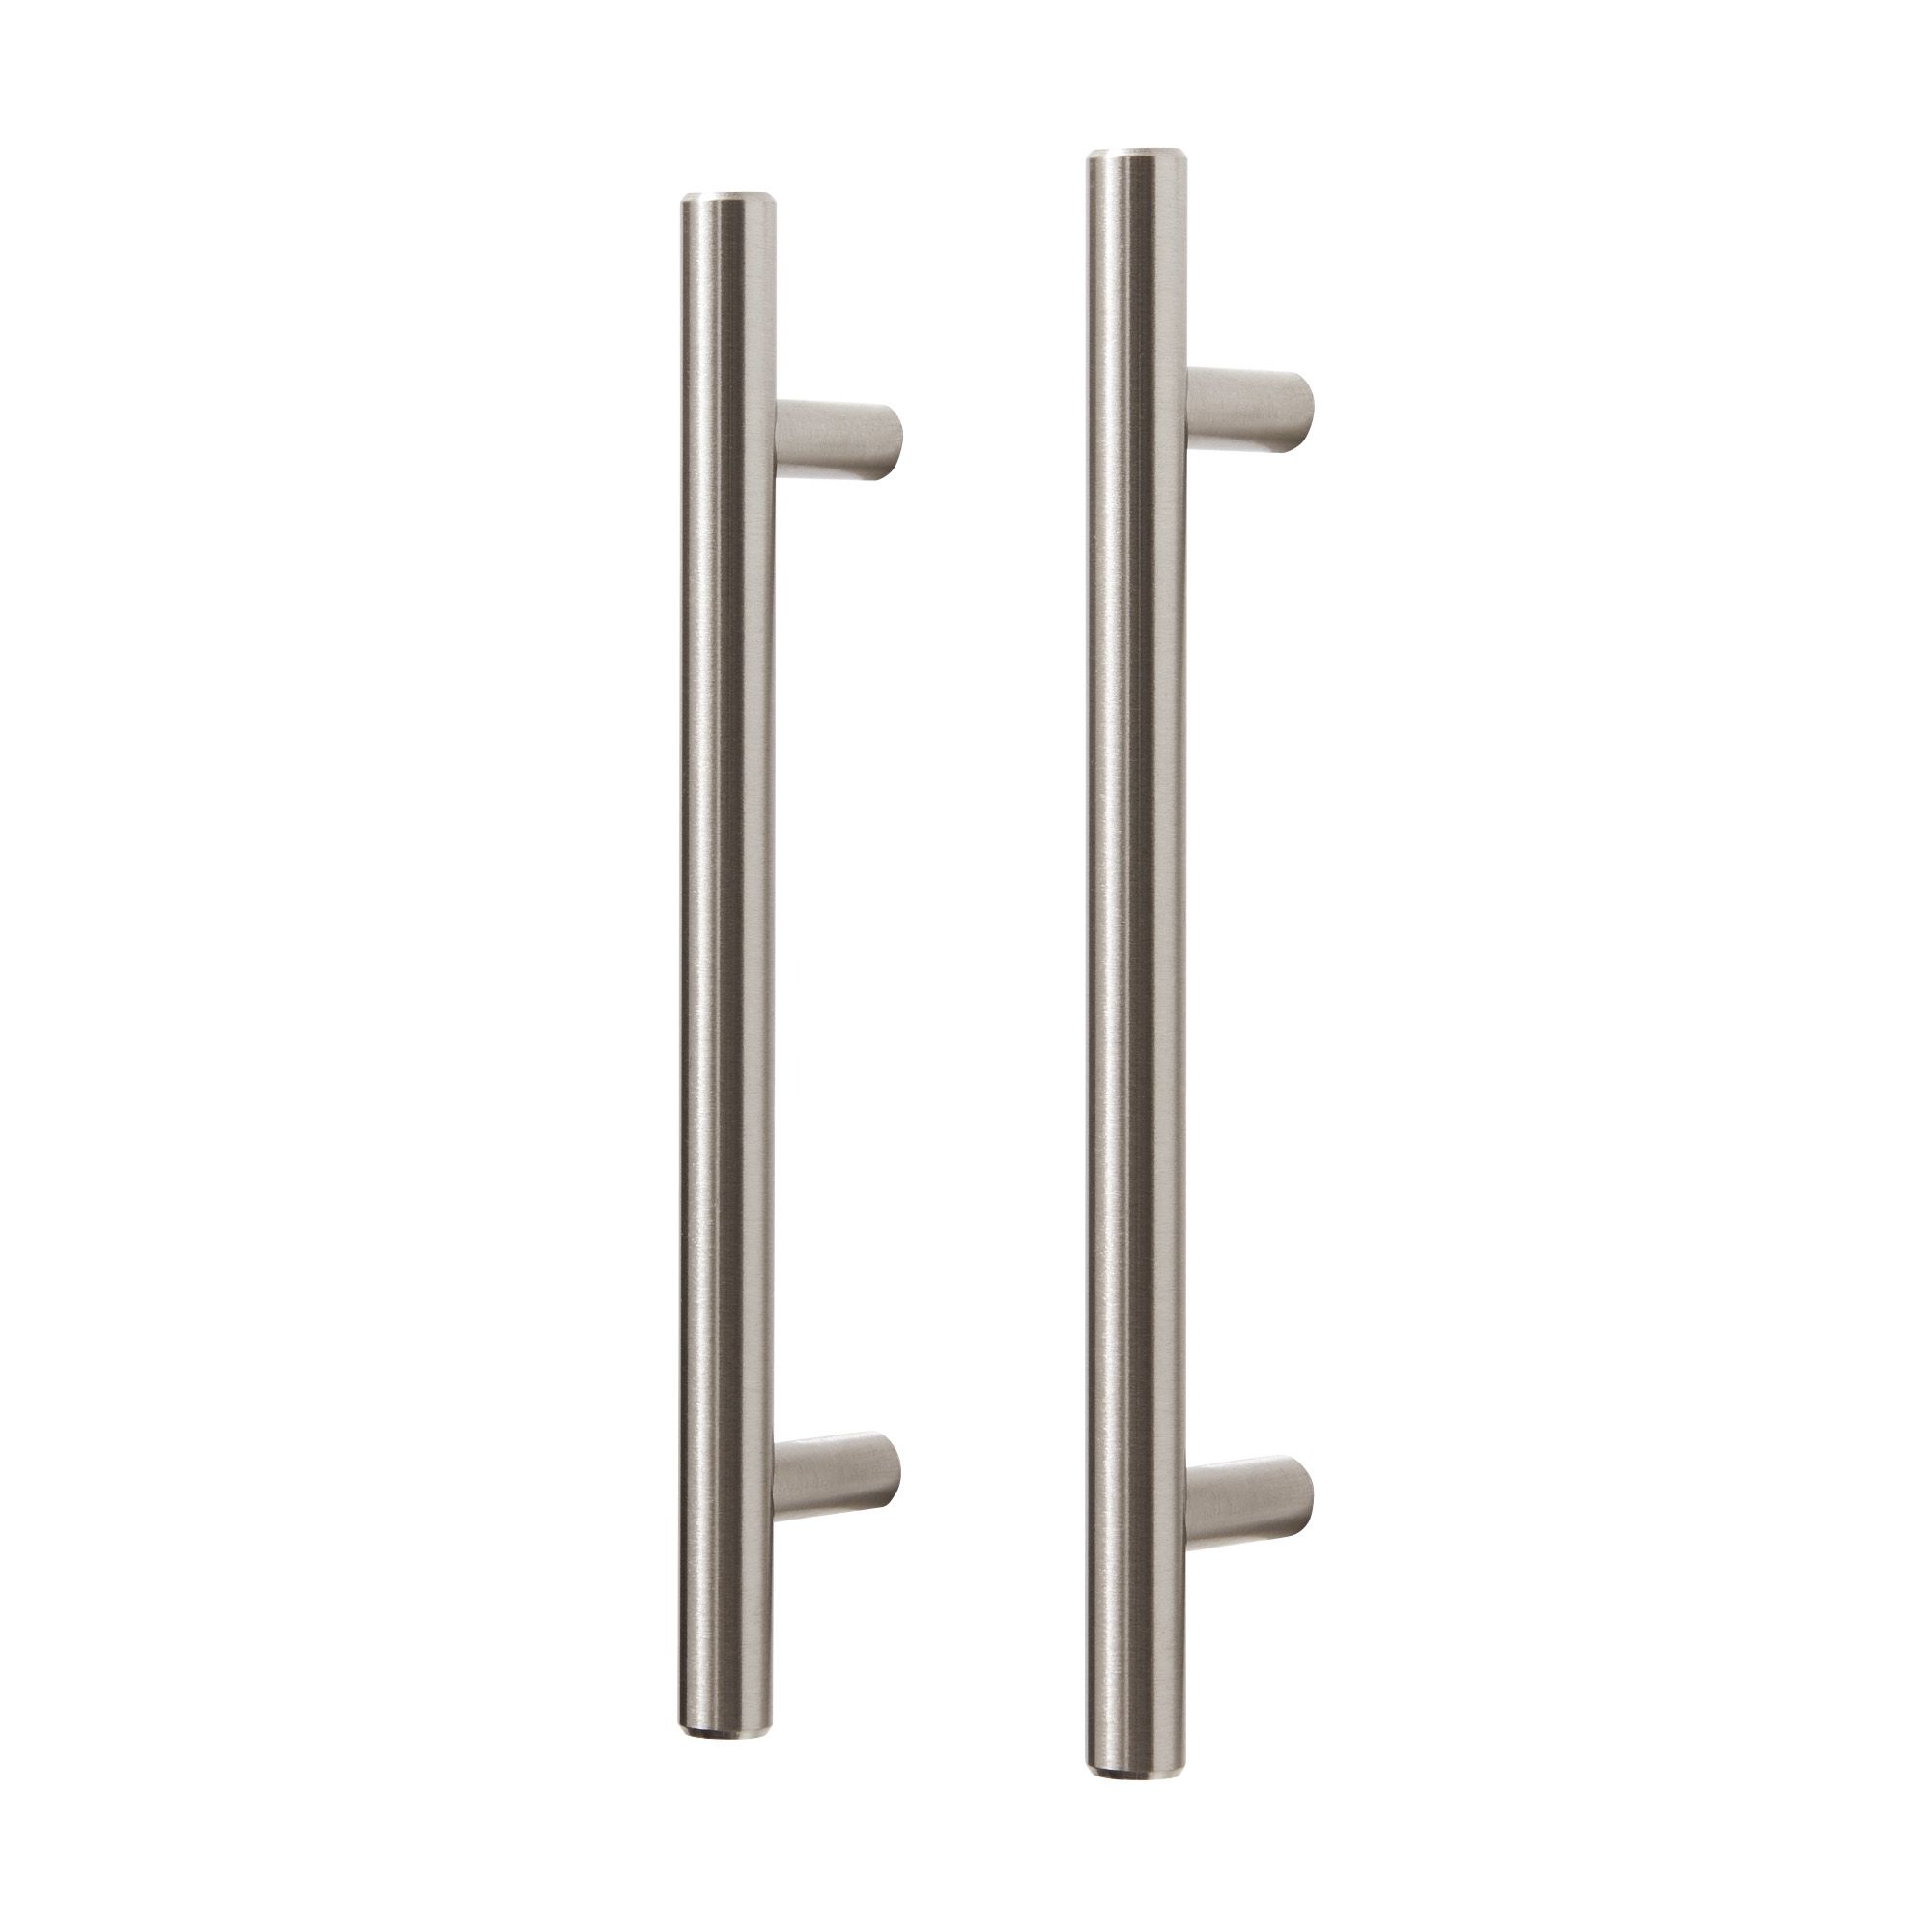 GoodHome Annatto Nickel effect Silver Kitchen cabinets Handle (L)18.8cm, Pack of 2